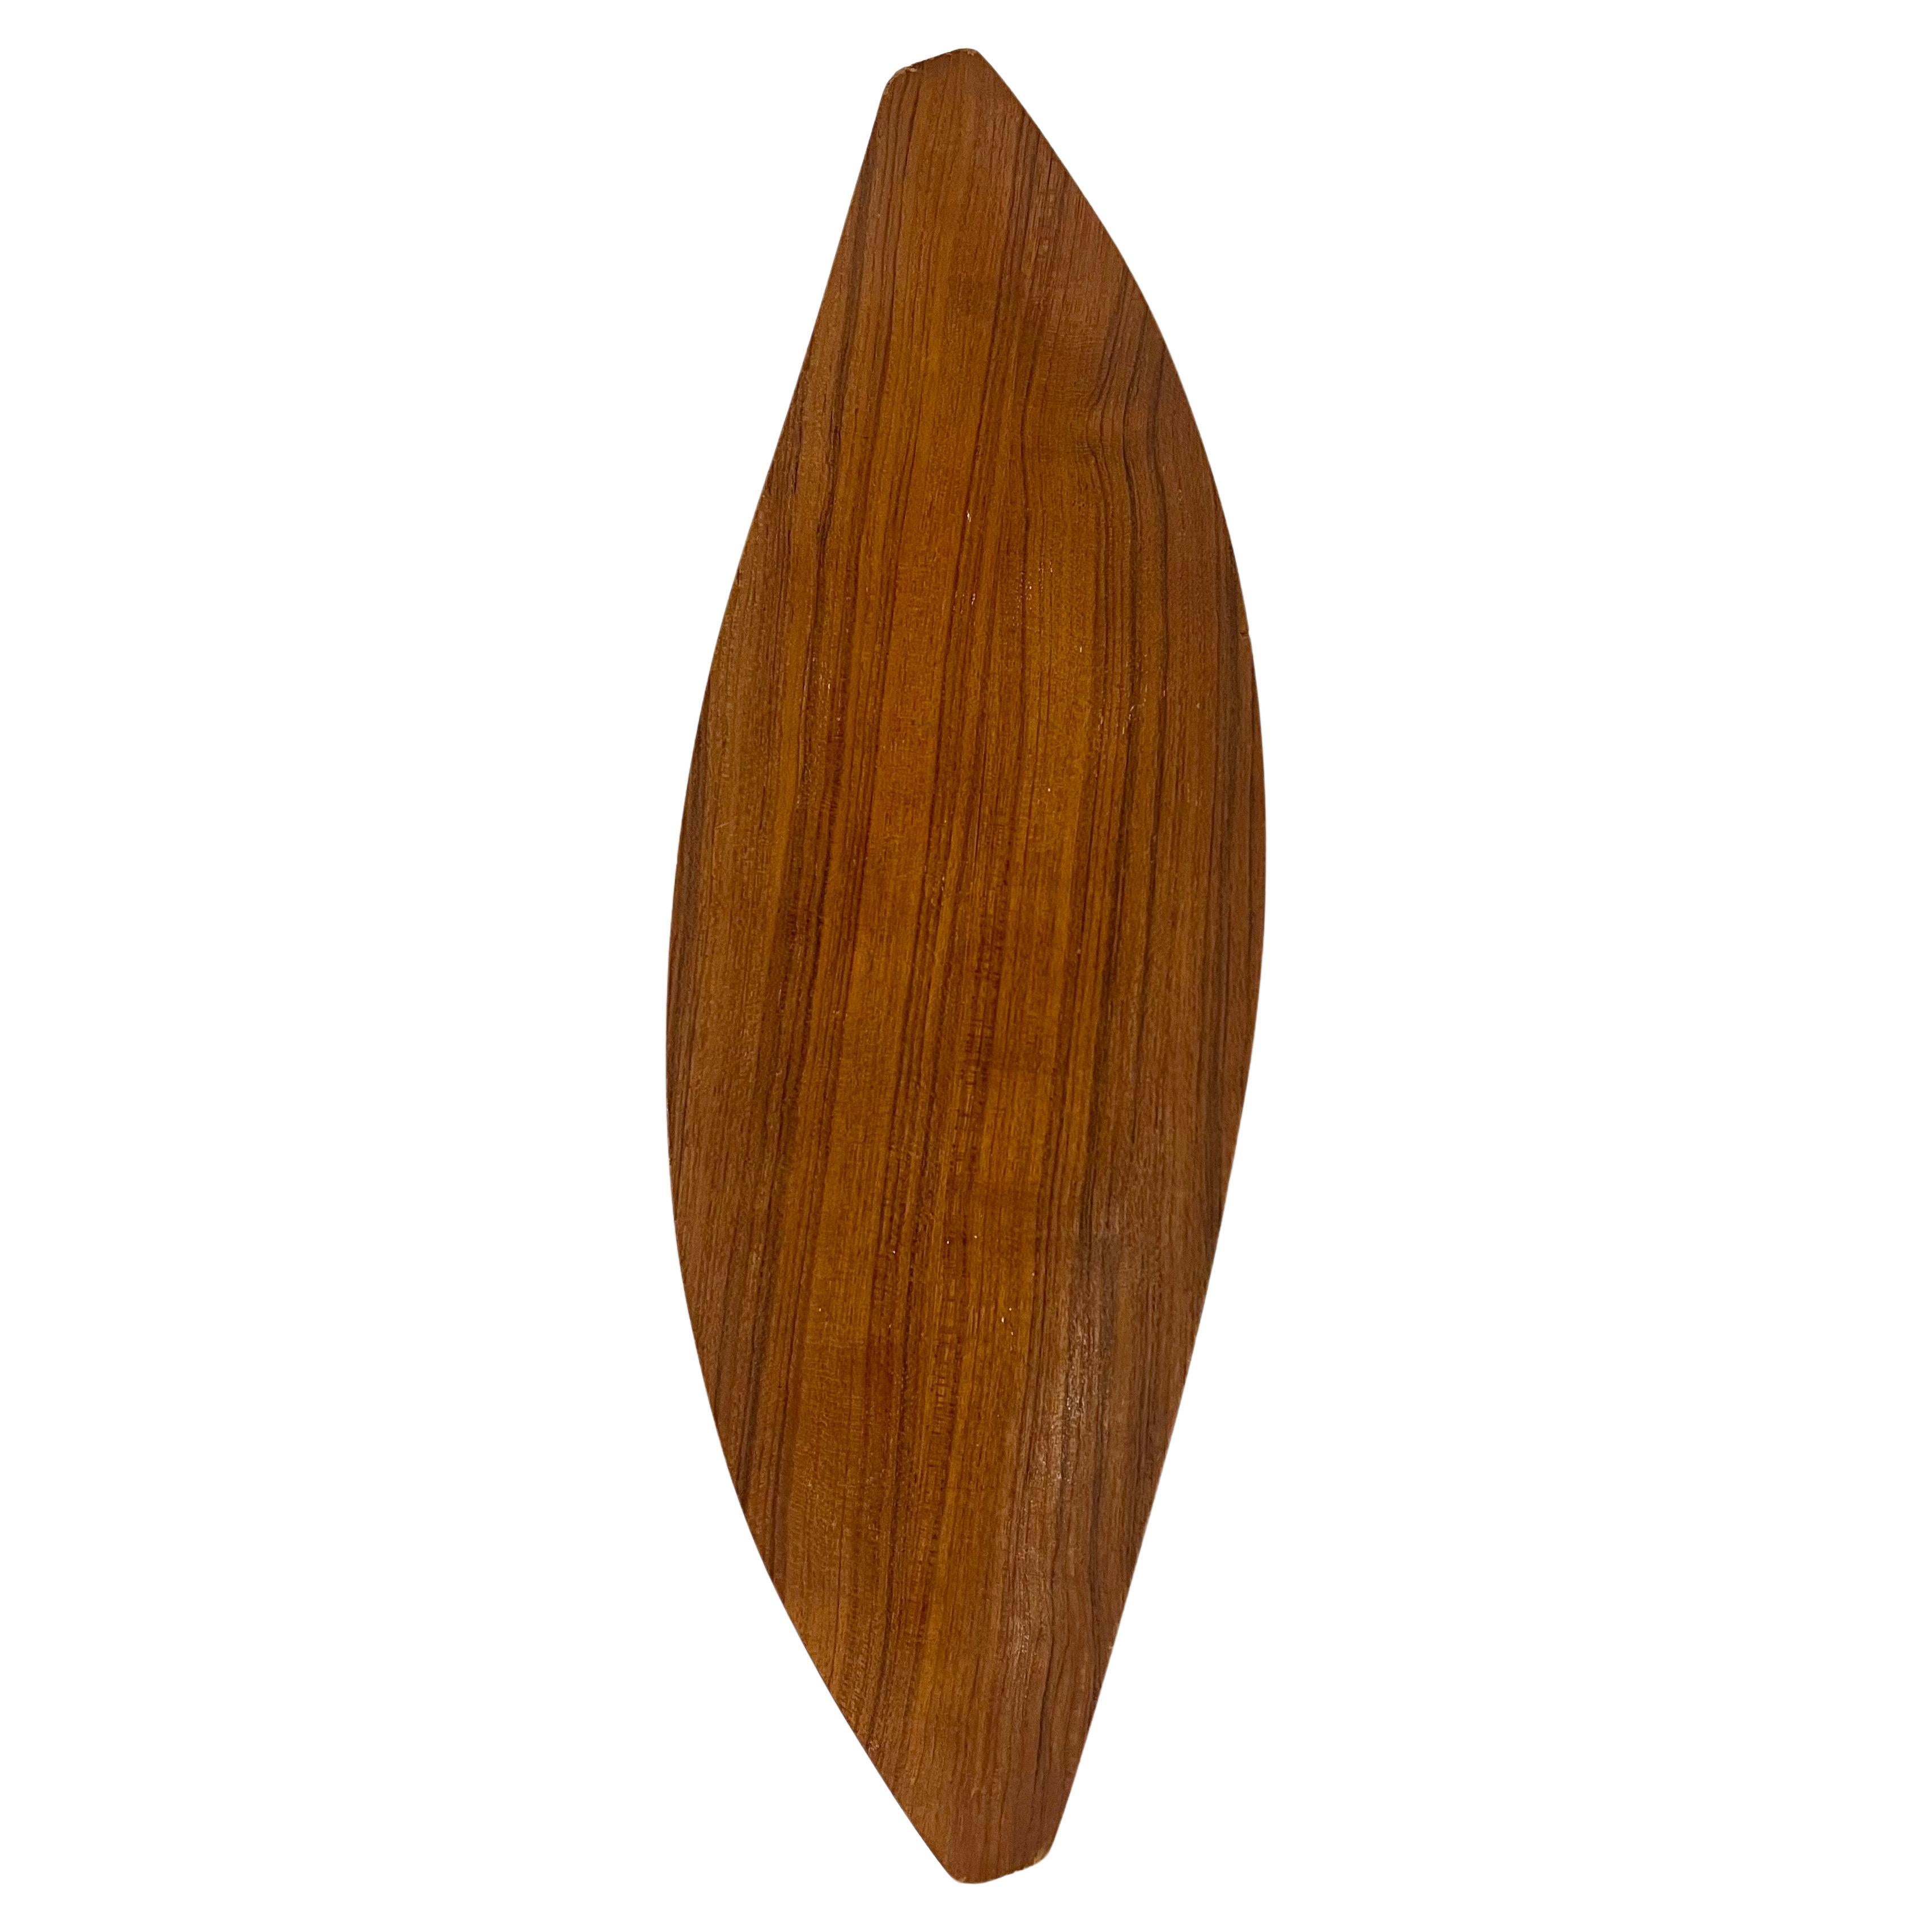 Japanese Mid Century freeform Molded Teak Tray by Shigemichi Aomine In Good Condition For Sale In San Diego, CA